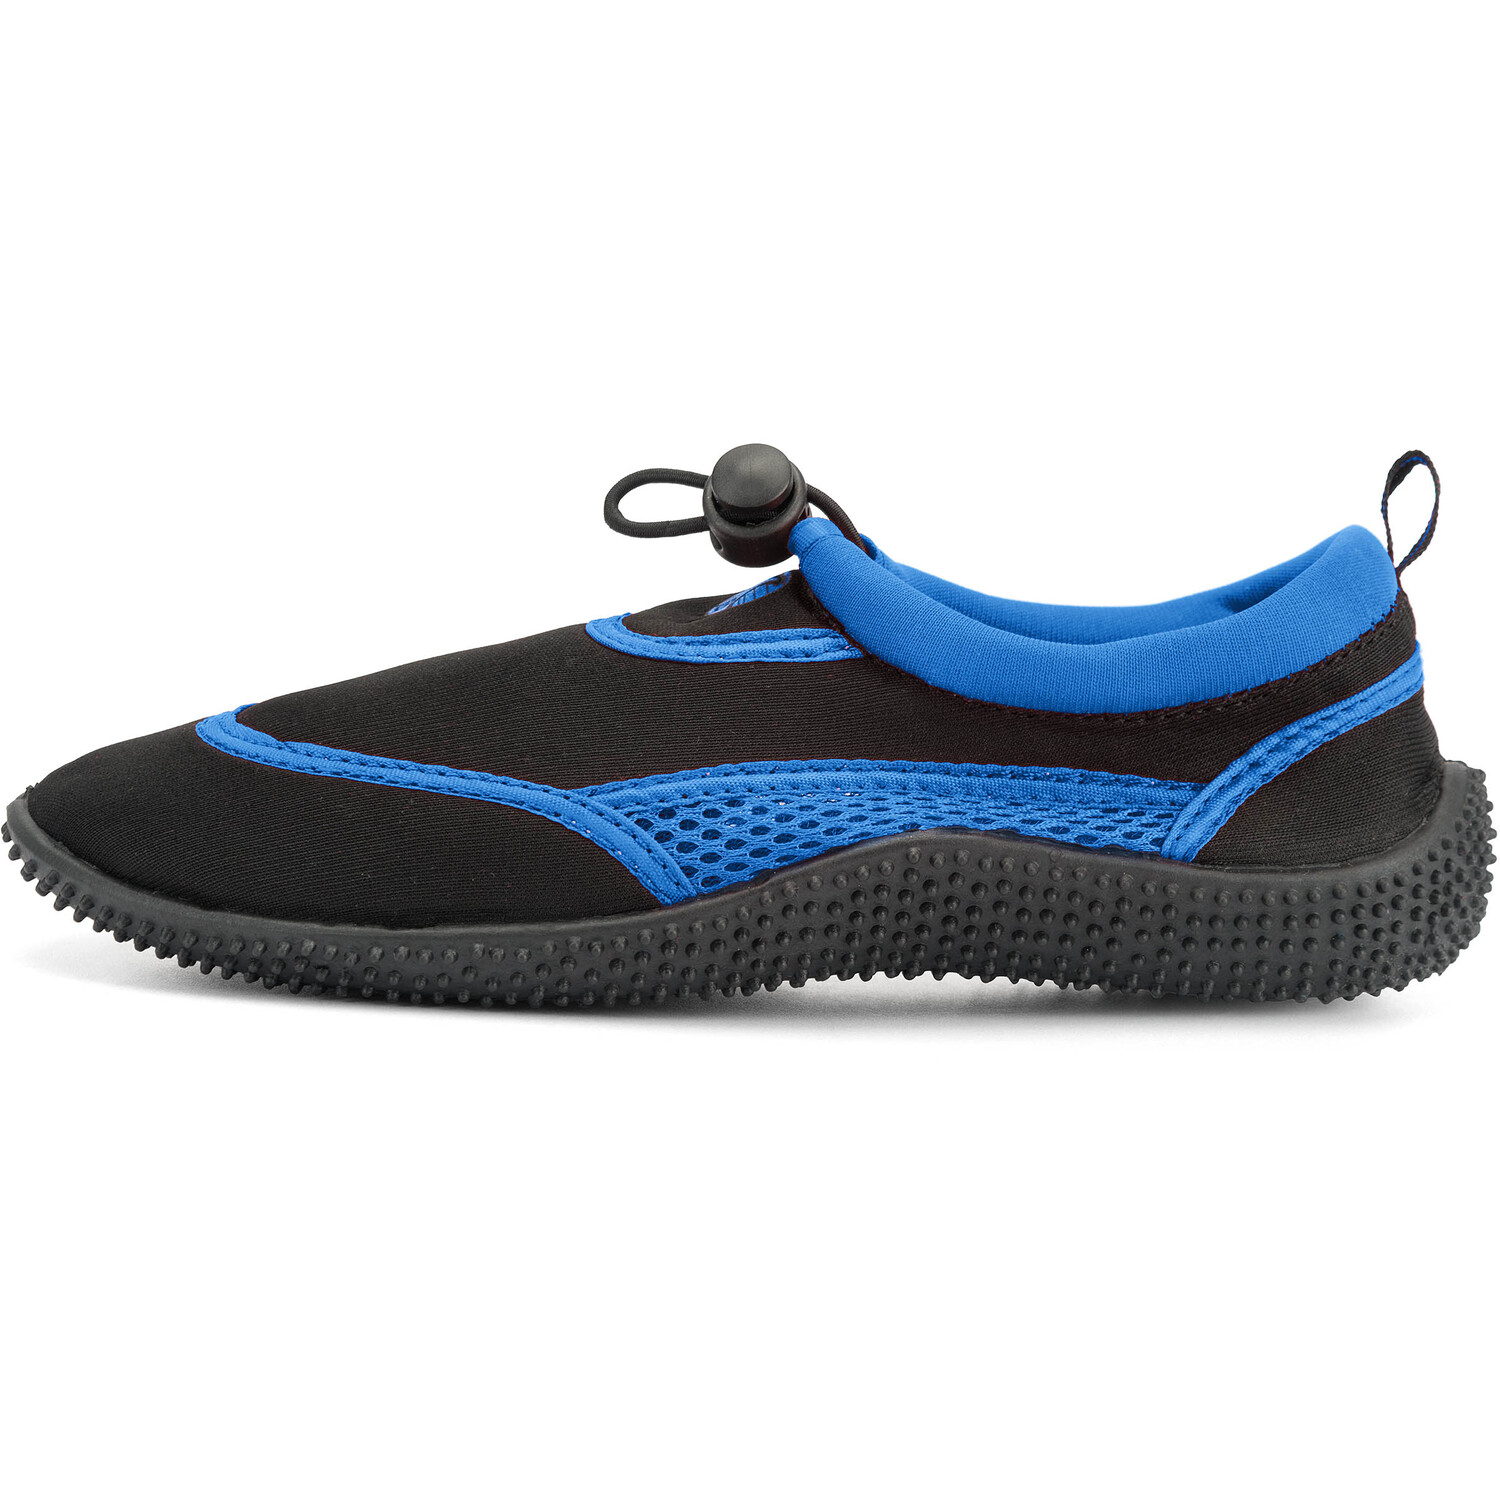 Toggle Kids Water Shoes - Blue Image 4